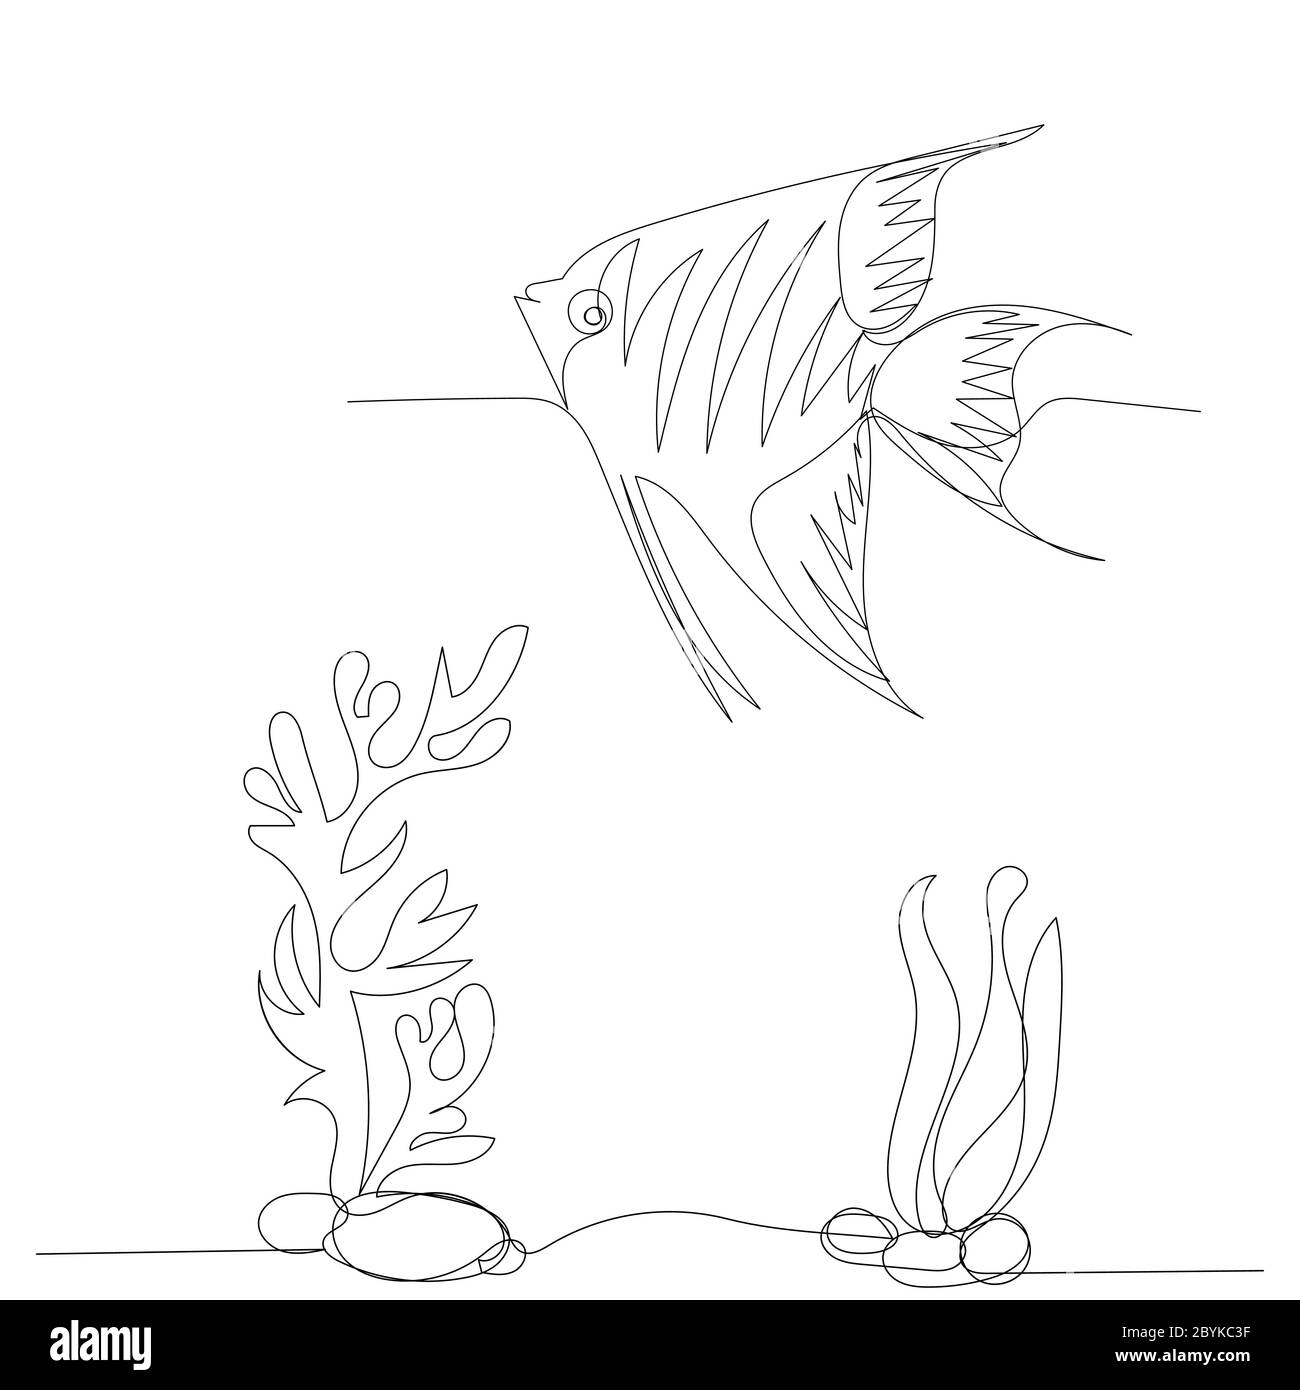 detailed illustration of a fish line art on white Stock Photo - Alamy